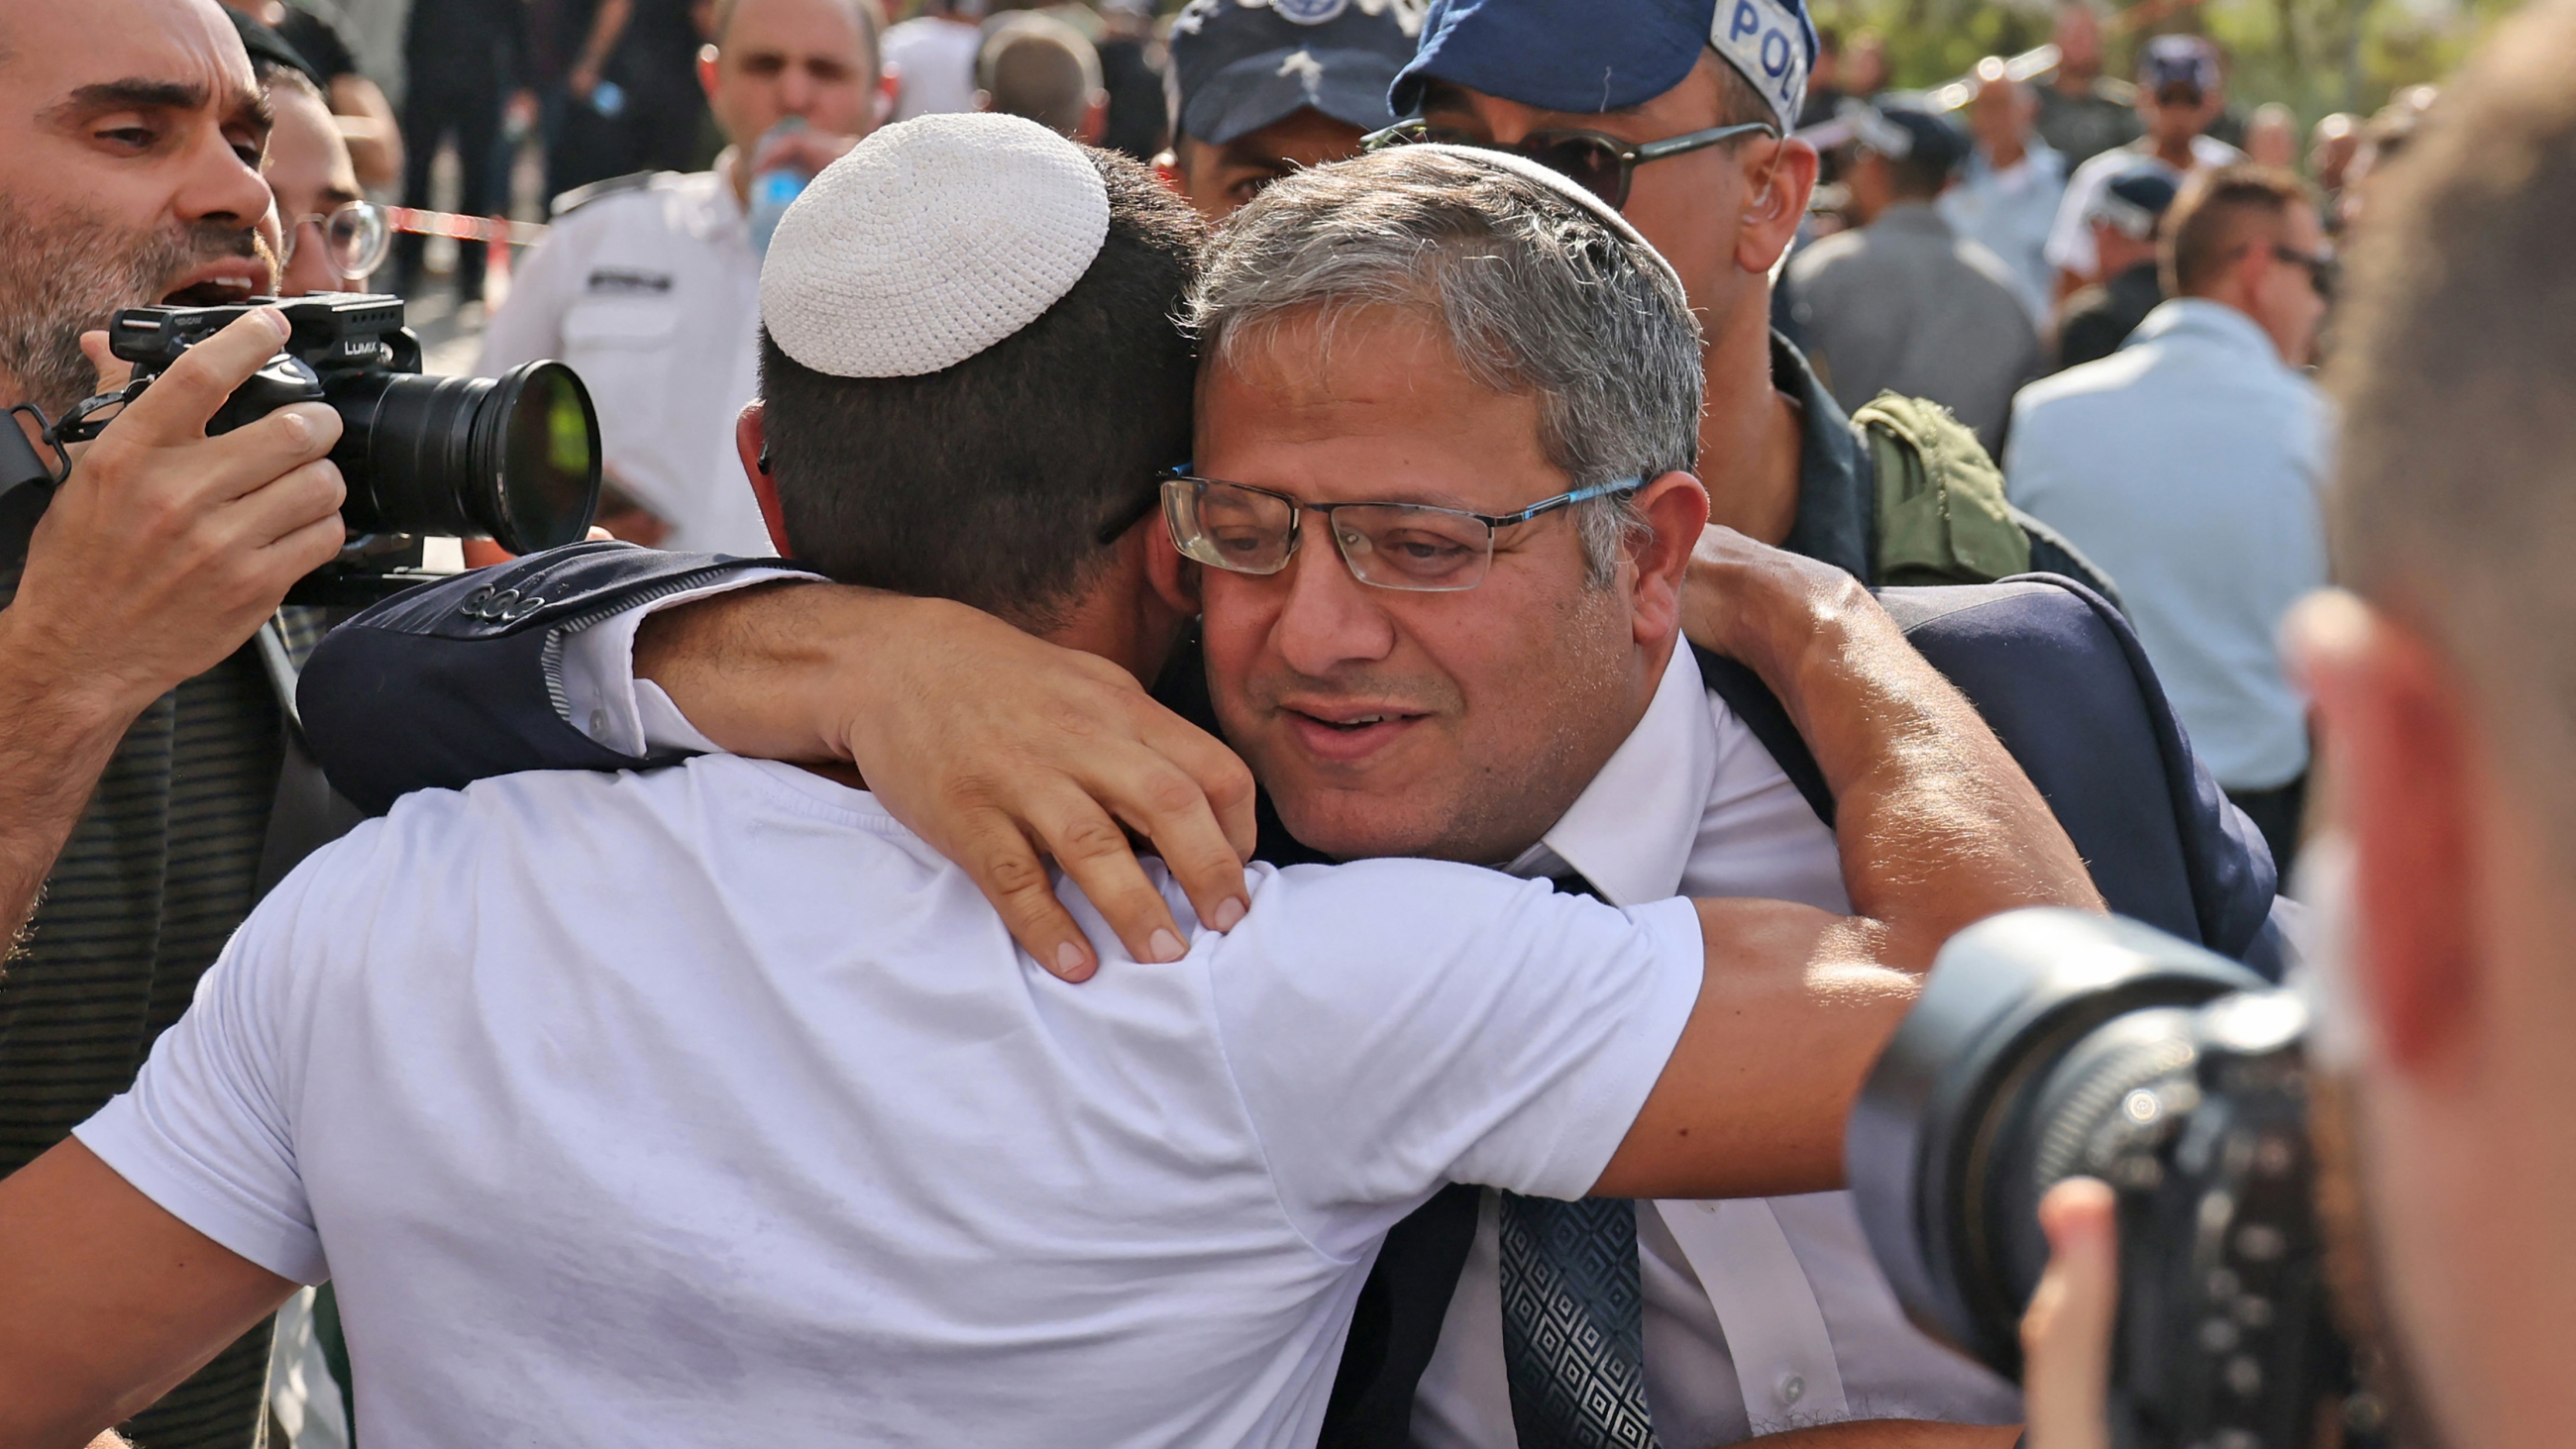 Israel's National Security Minister Itamar Ben-Gvir hugs a supporter as he arrives to the site of a reported attack in the Israeli settlement of Maale Adumim in the occupied West Bank, on 1 August 2023 (AFP)